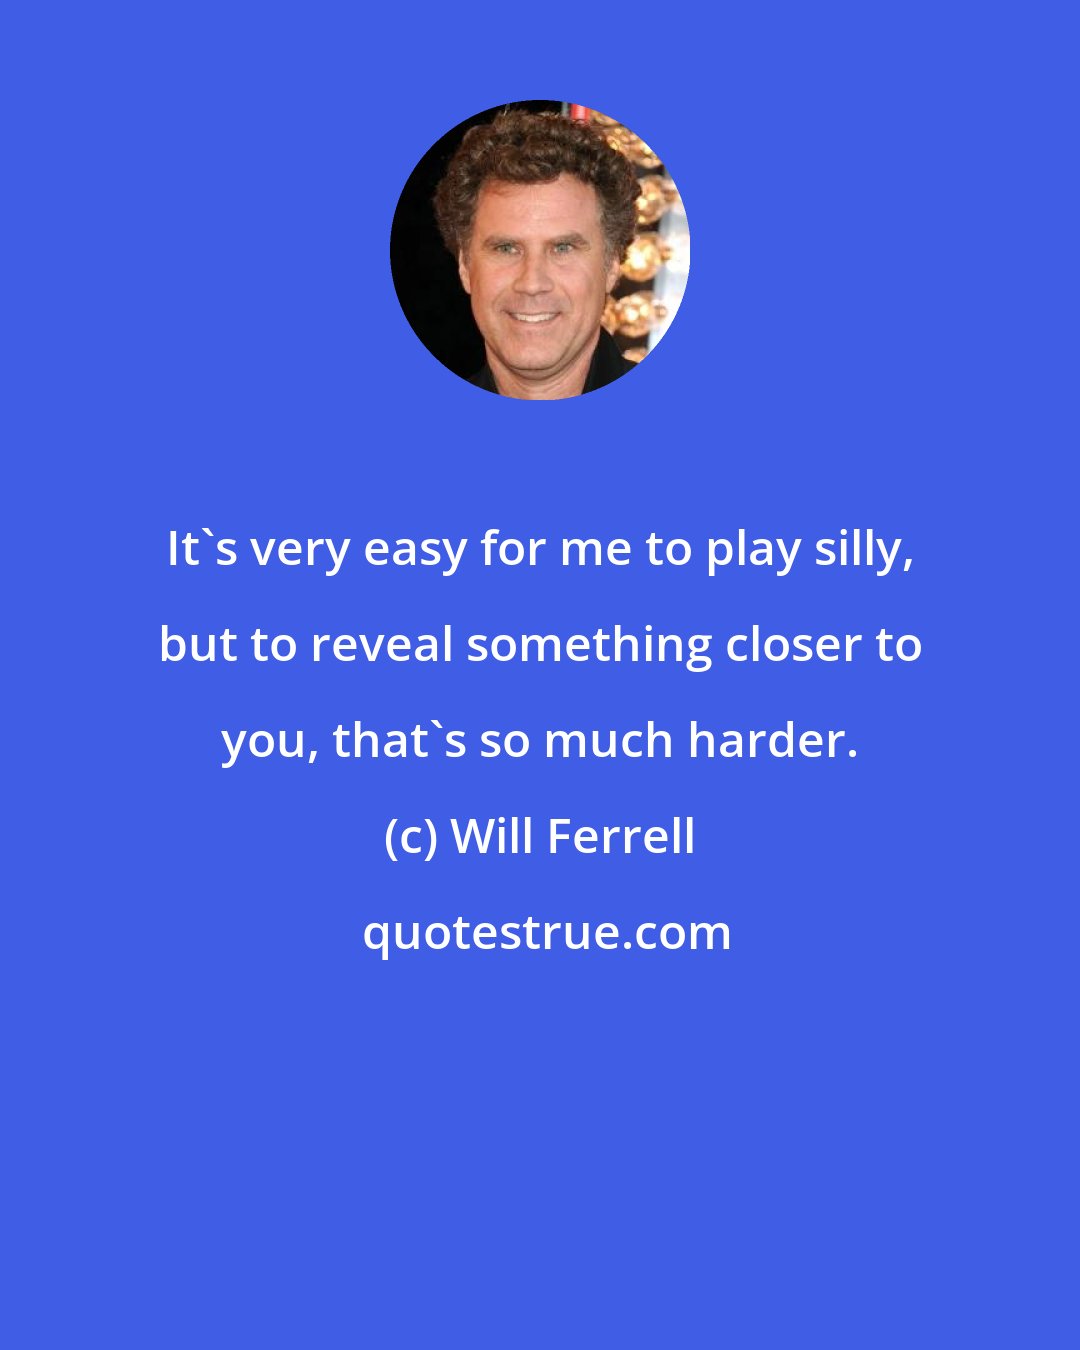 Will Ferrell: It's very easy for me to play silly, but to reveal something closer to you, that's so much harder.